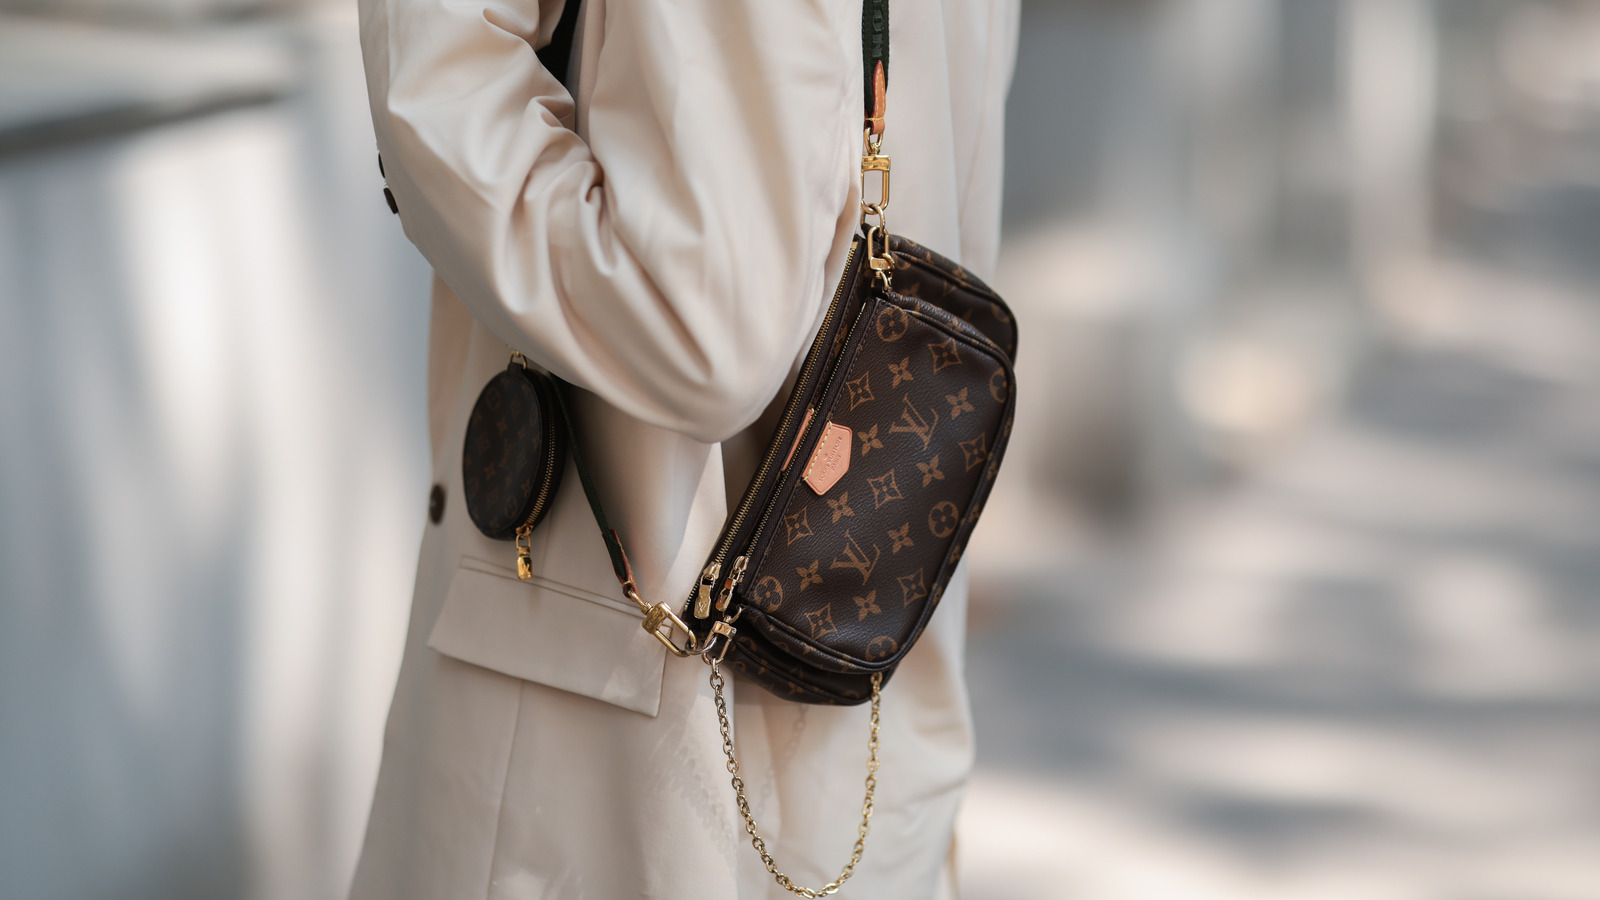 Sarah Posch wearing Louis Vuitton brown Monogramm On the Go bag, News  Photo - Getty Images